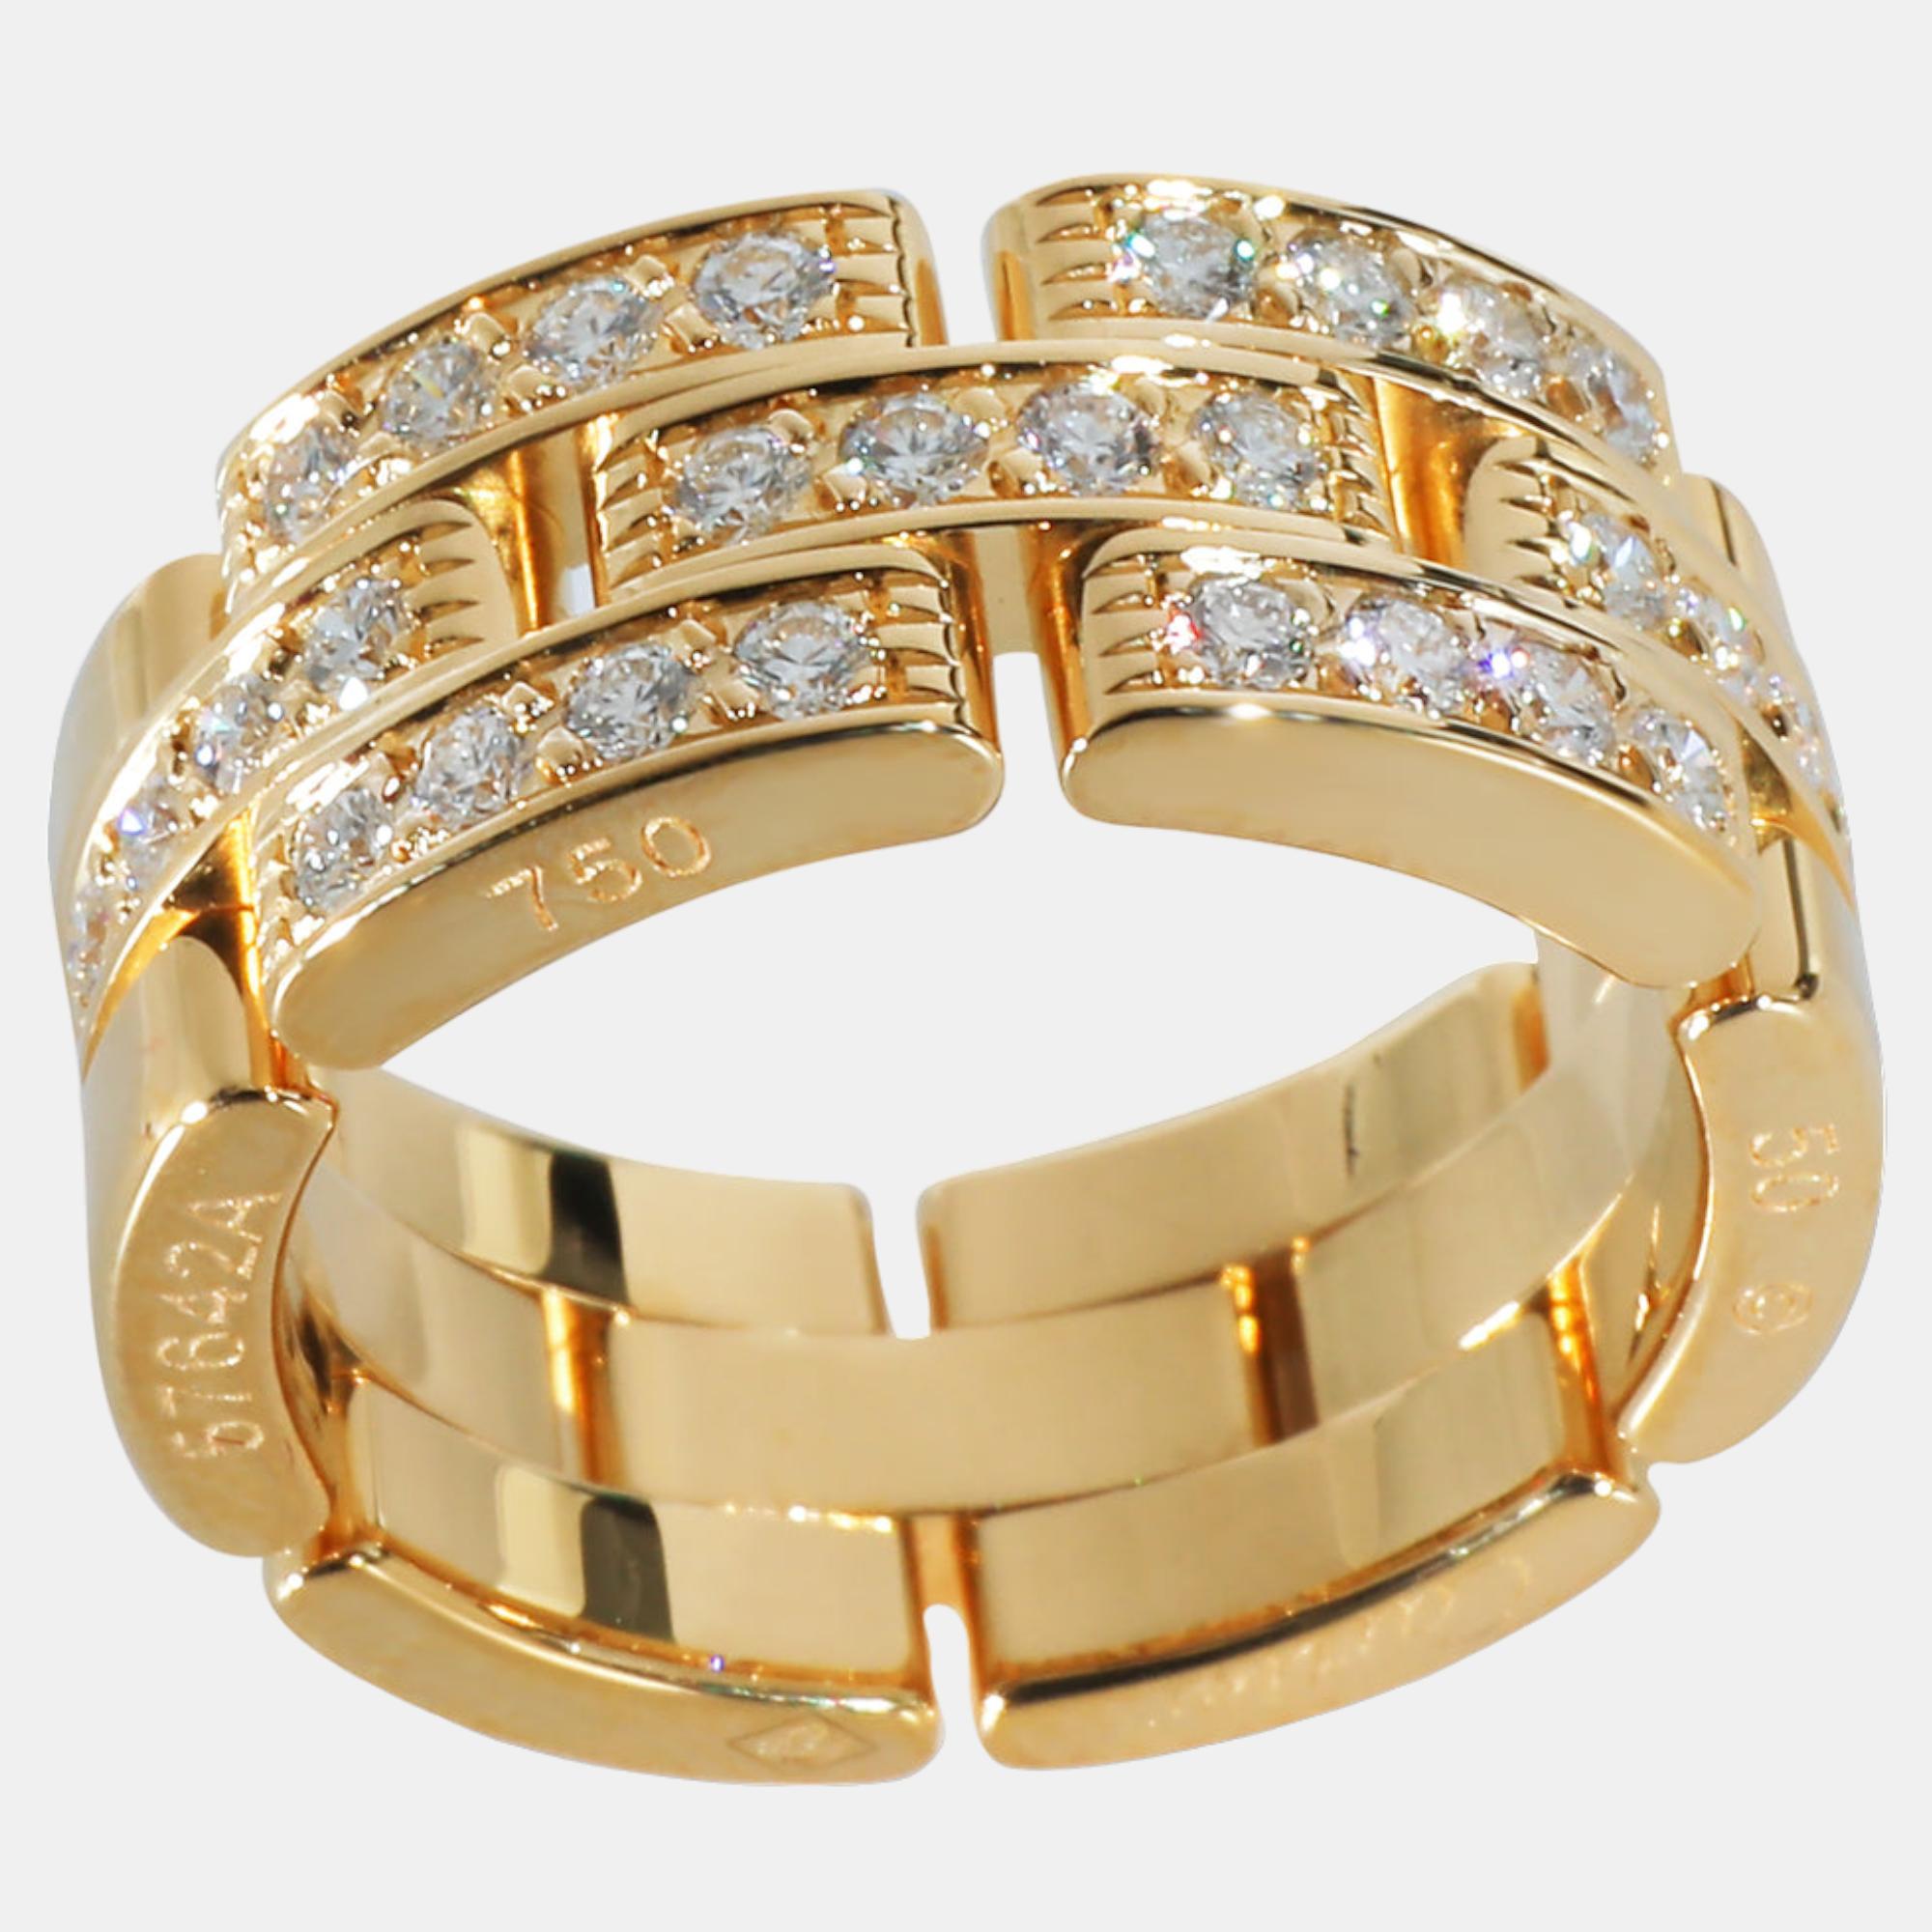 Cartier Maillon Panthere Band In 18k Yellow Gold 0.53 CTW